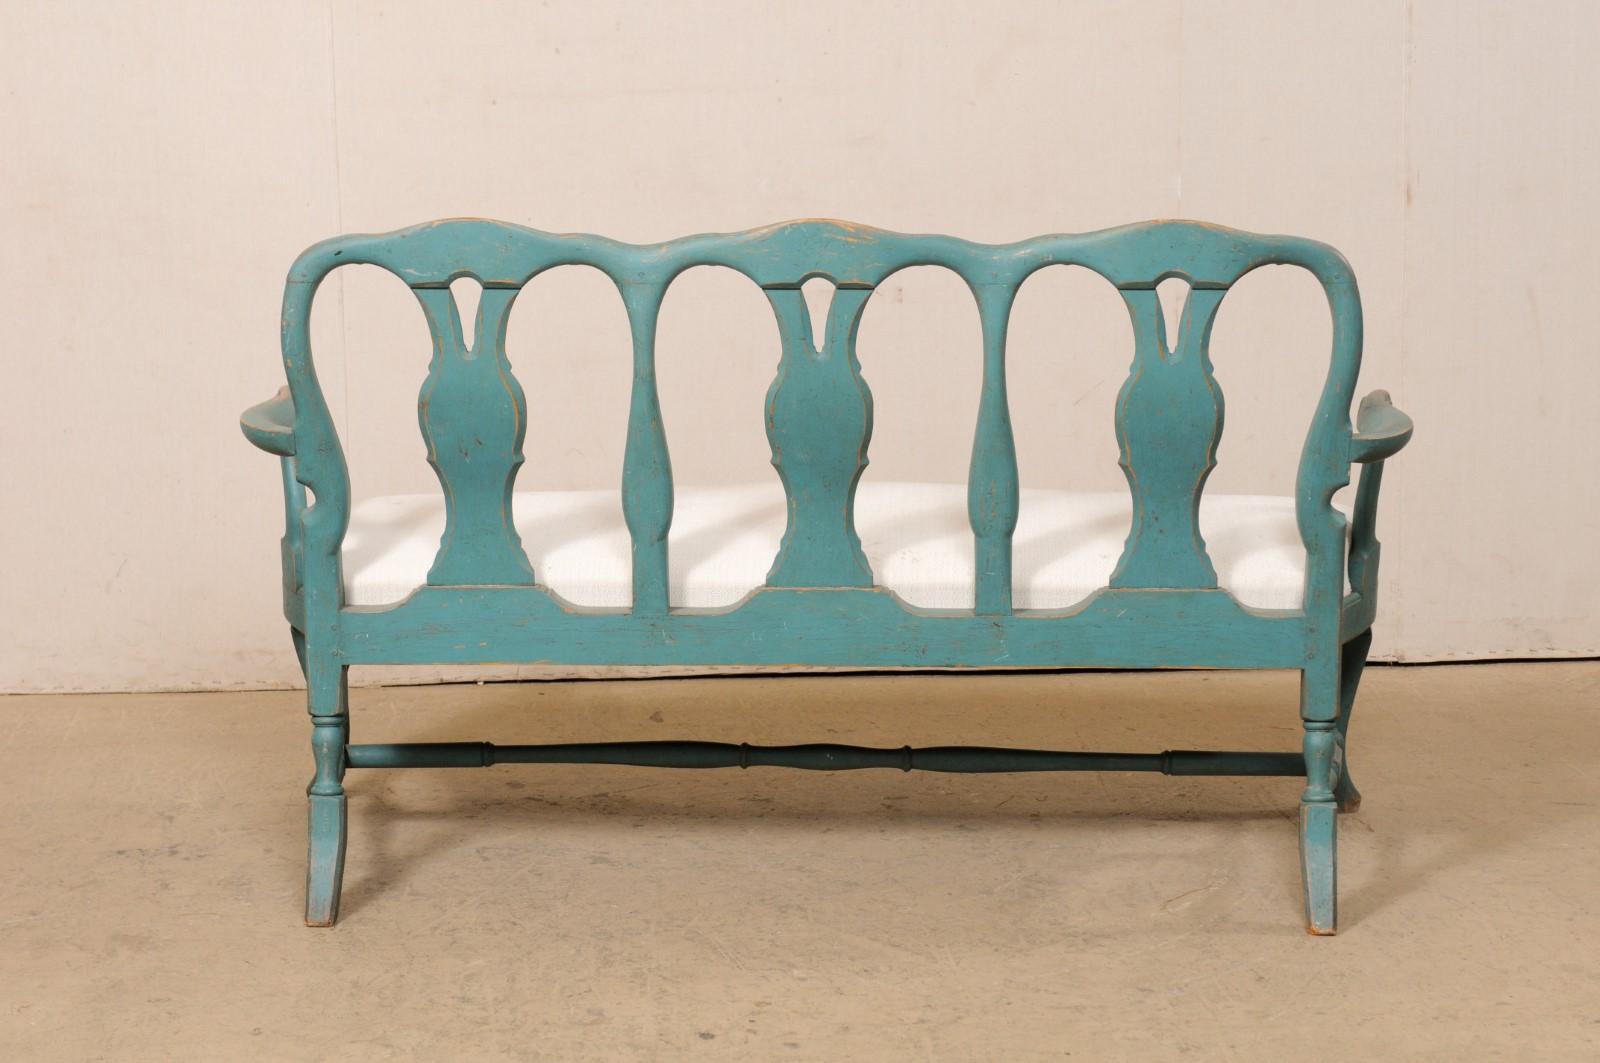 Swedish Period Rococo 3-Chair Back Painted Sofa Bench, Early 18th Century For Sale 3